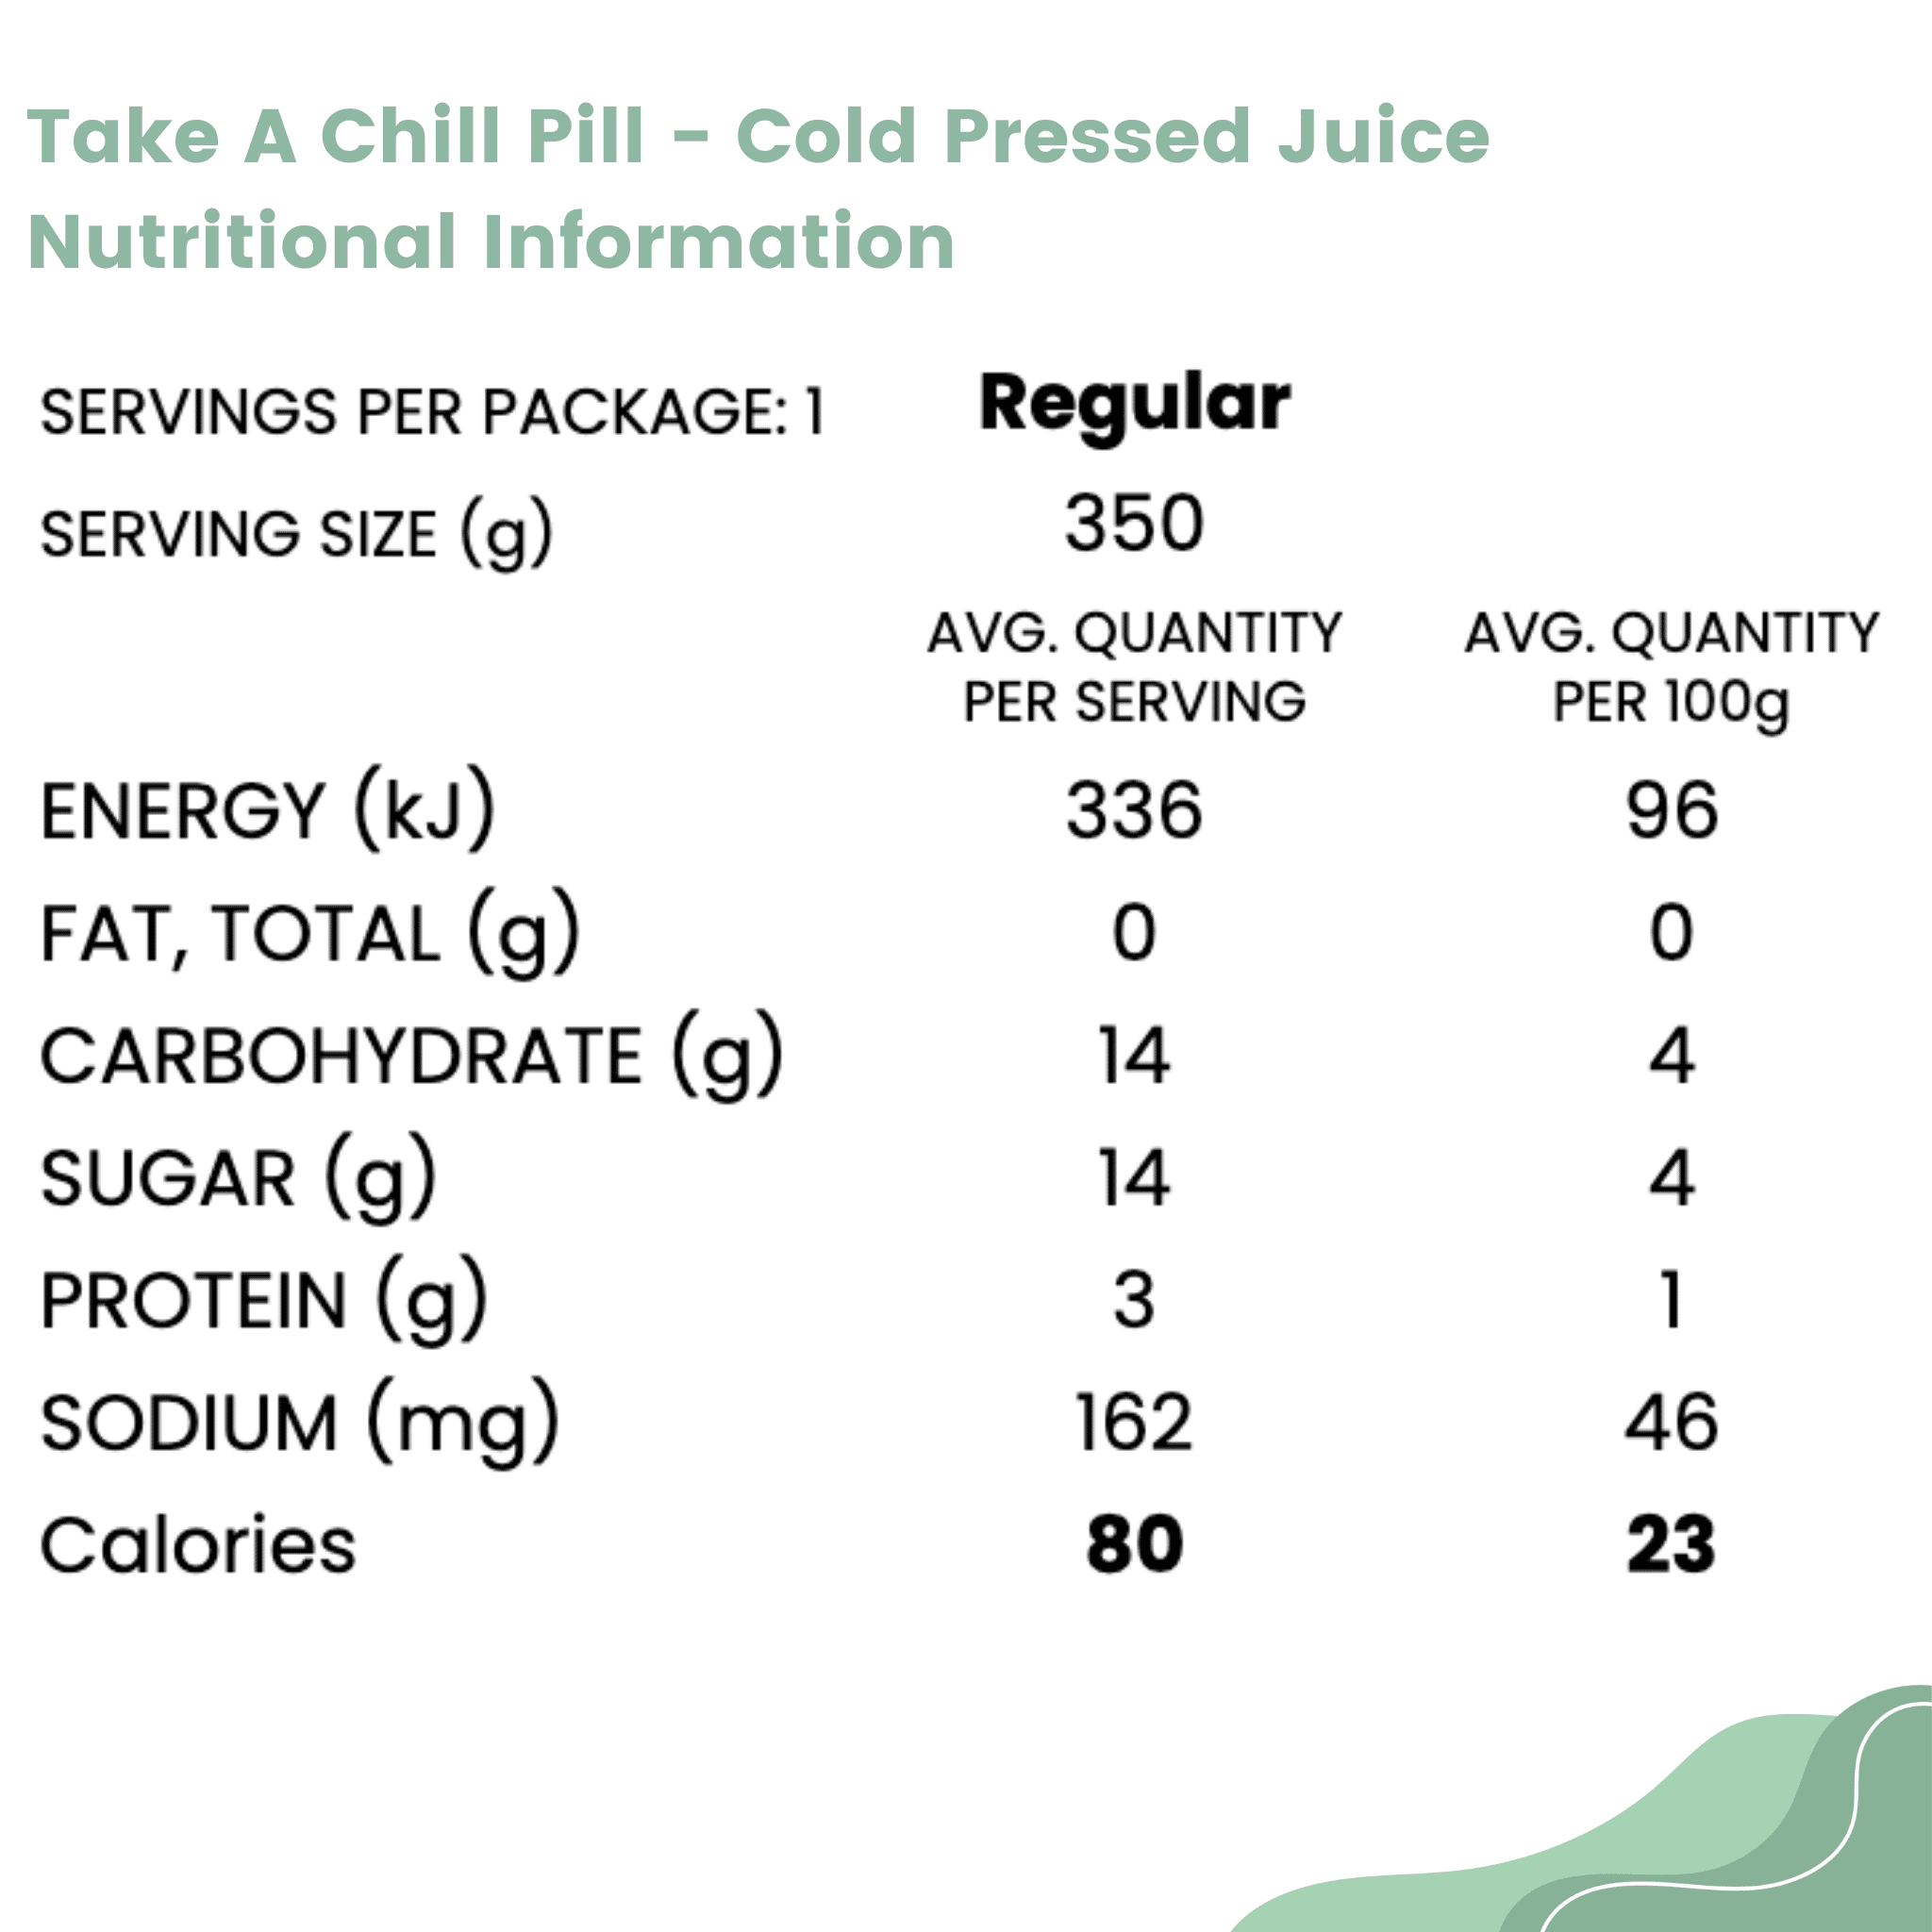 Take a Chill Pill - Cold Pressed Juice